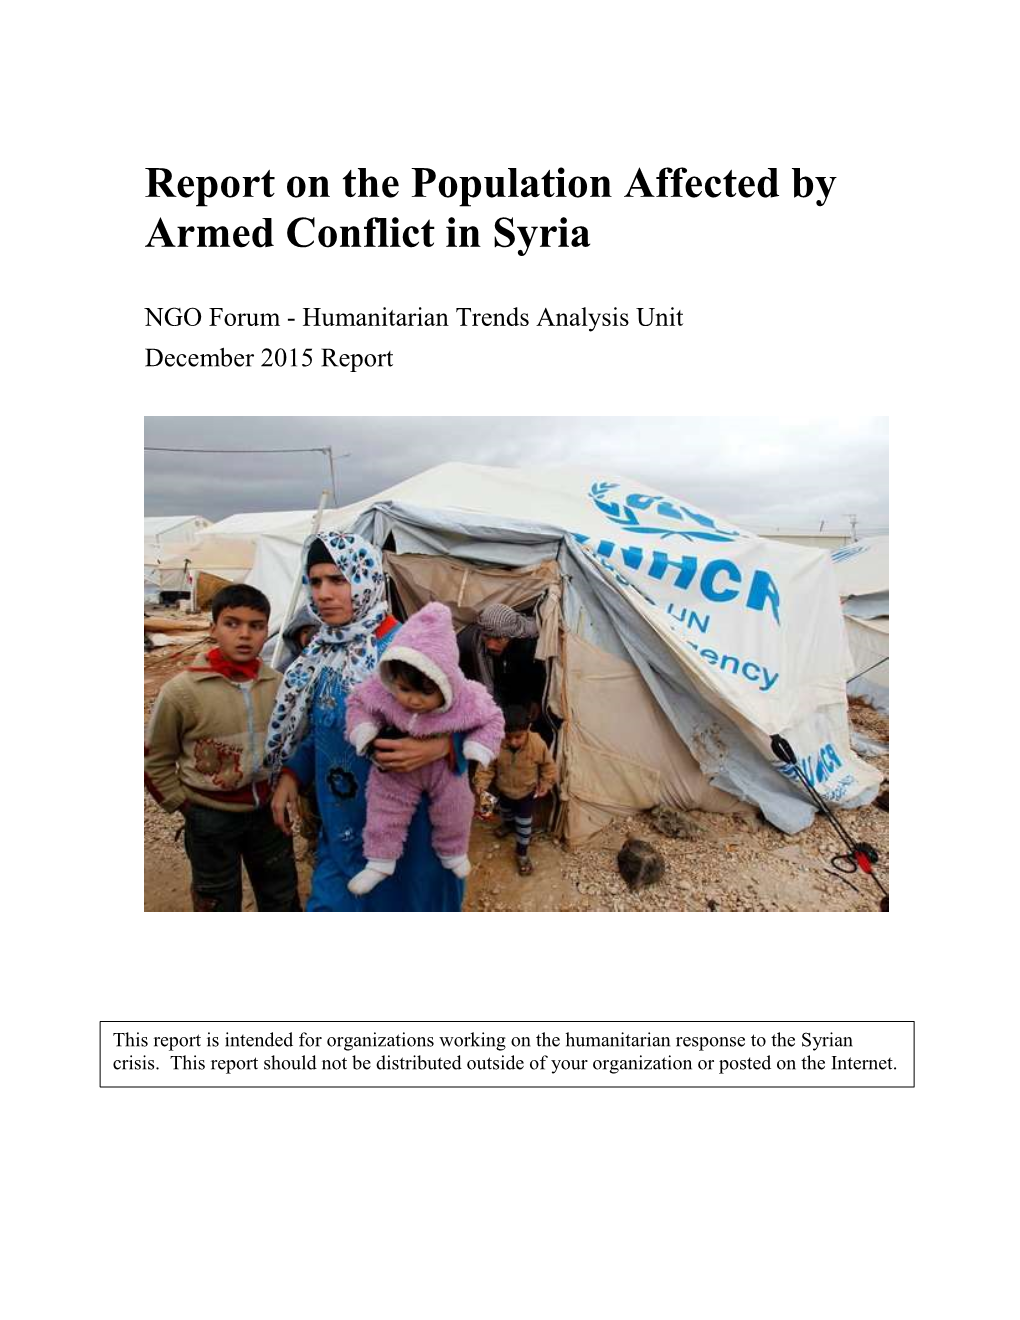 Report on the Population Affected by Armed Conflict in Syria